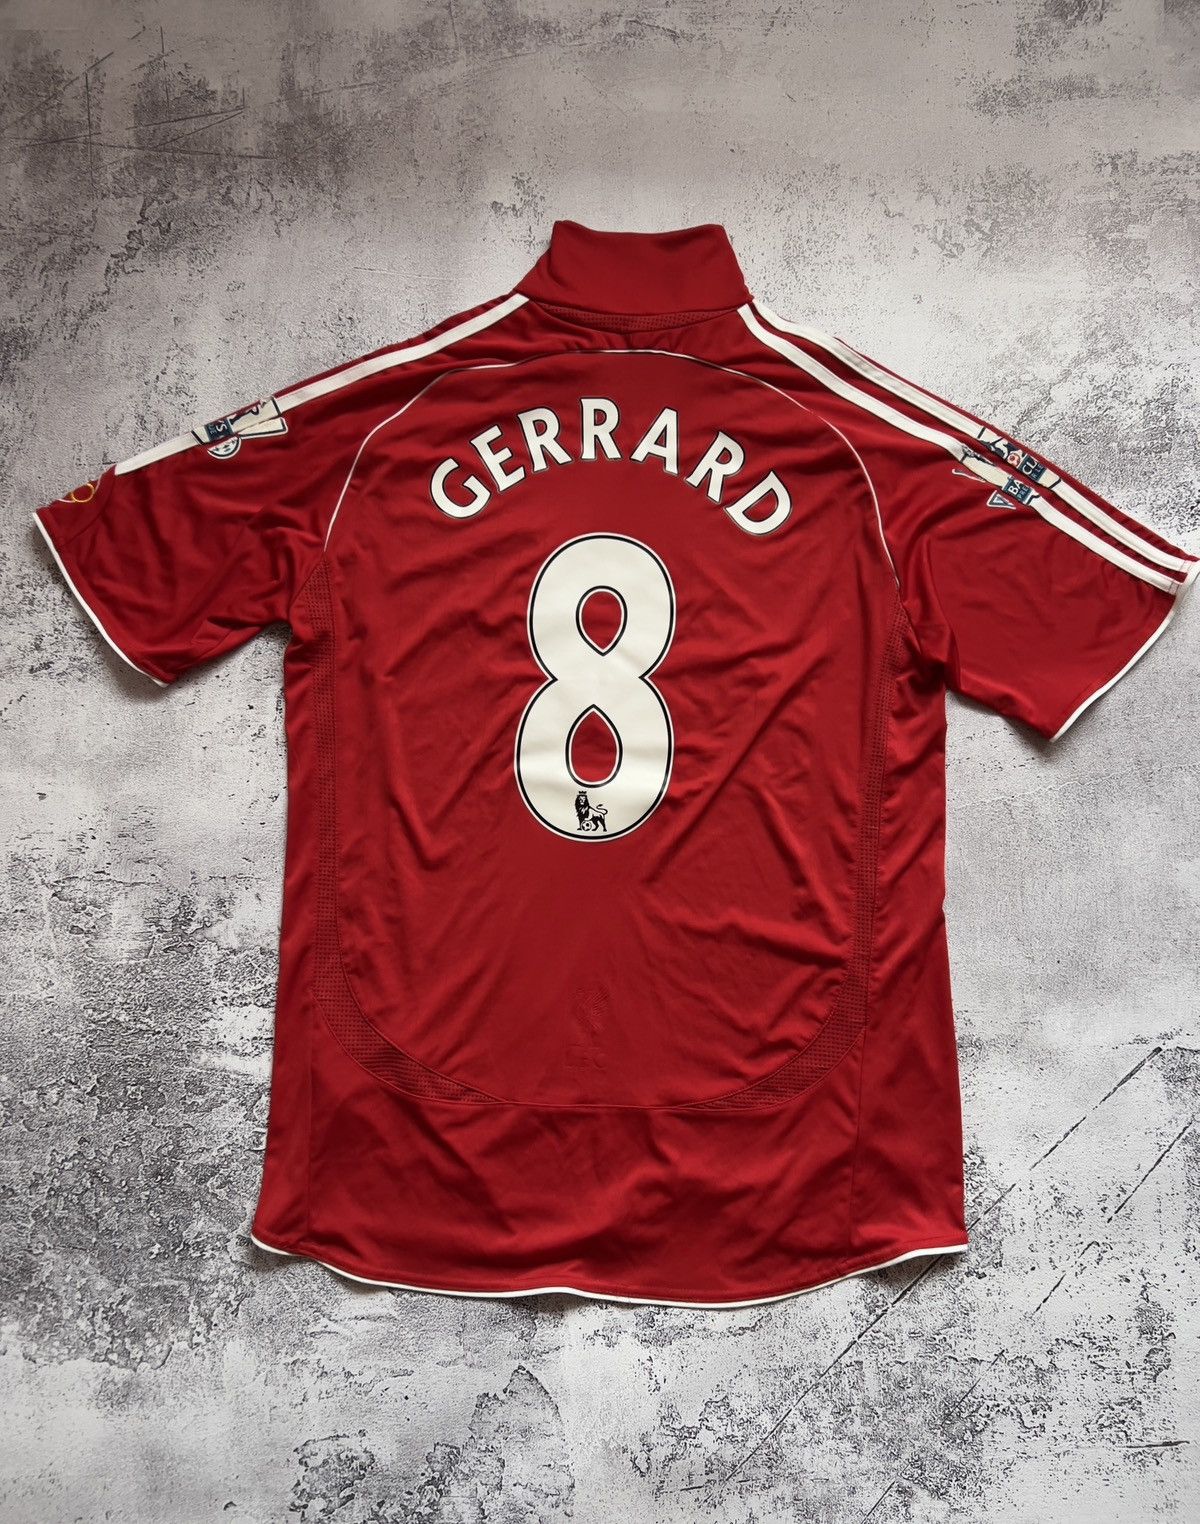 Pre-owned Adidas X Soccer Jersey Vintage Gerrard Liverpool Fc Soccer Jersey 2008 Retro Knit In Red